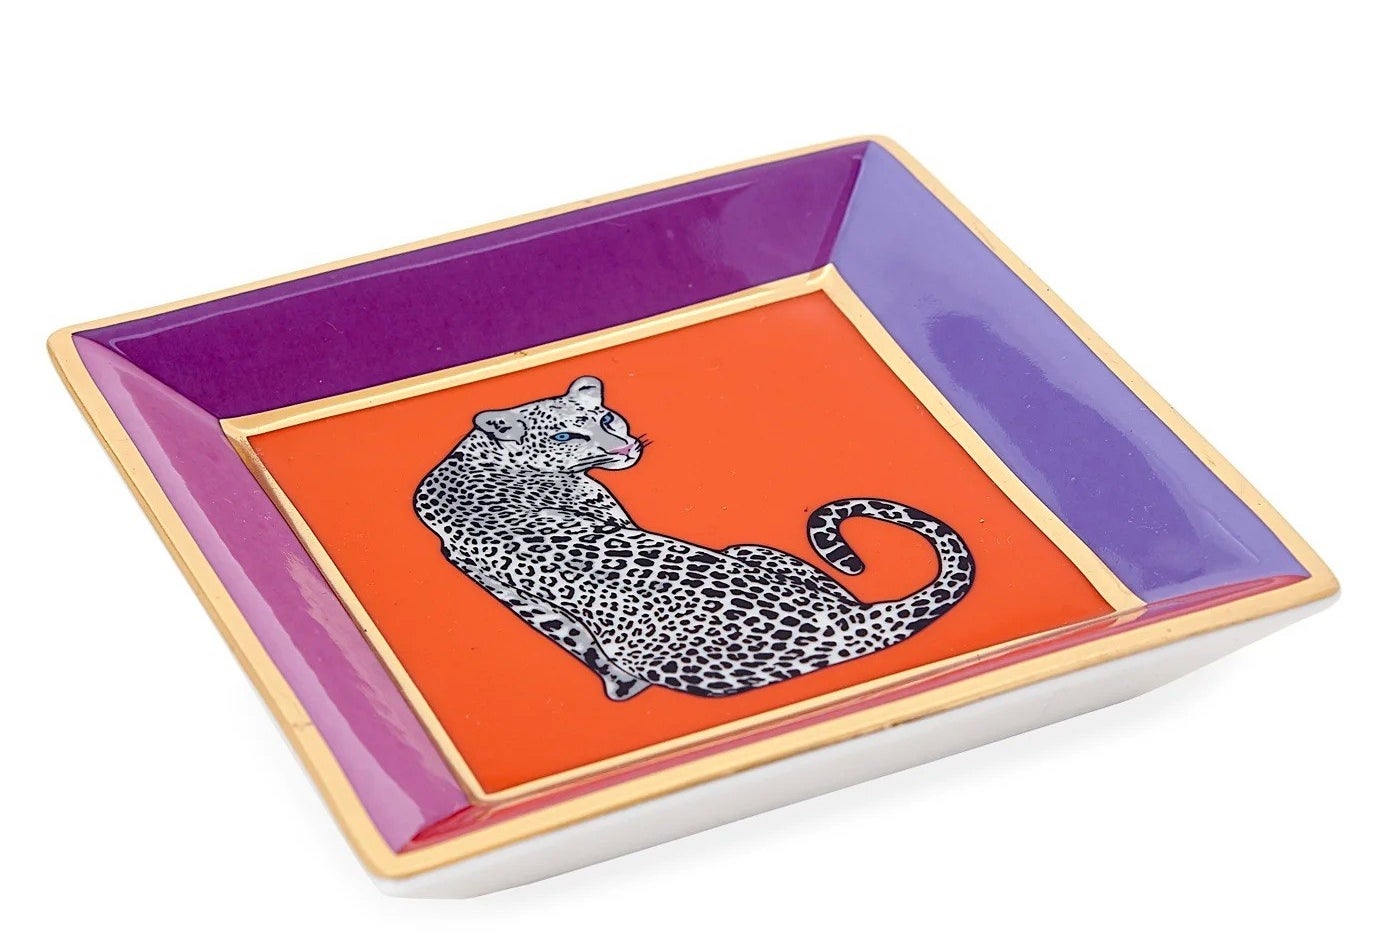 the purple and red dish with a snow leopard in the middle